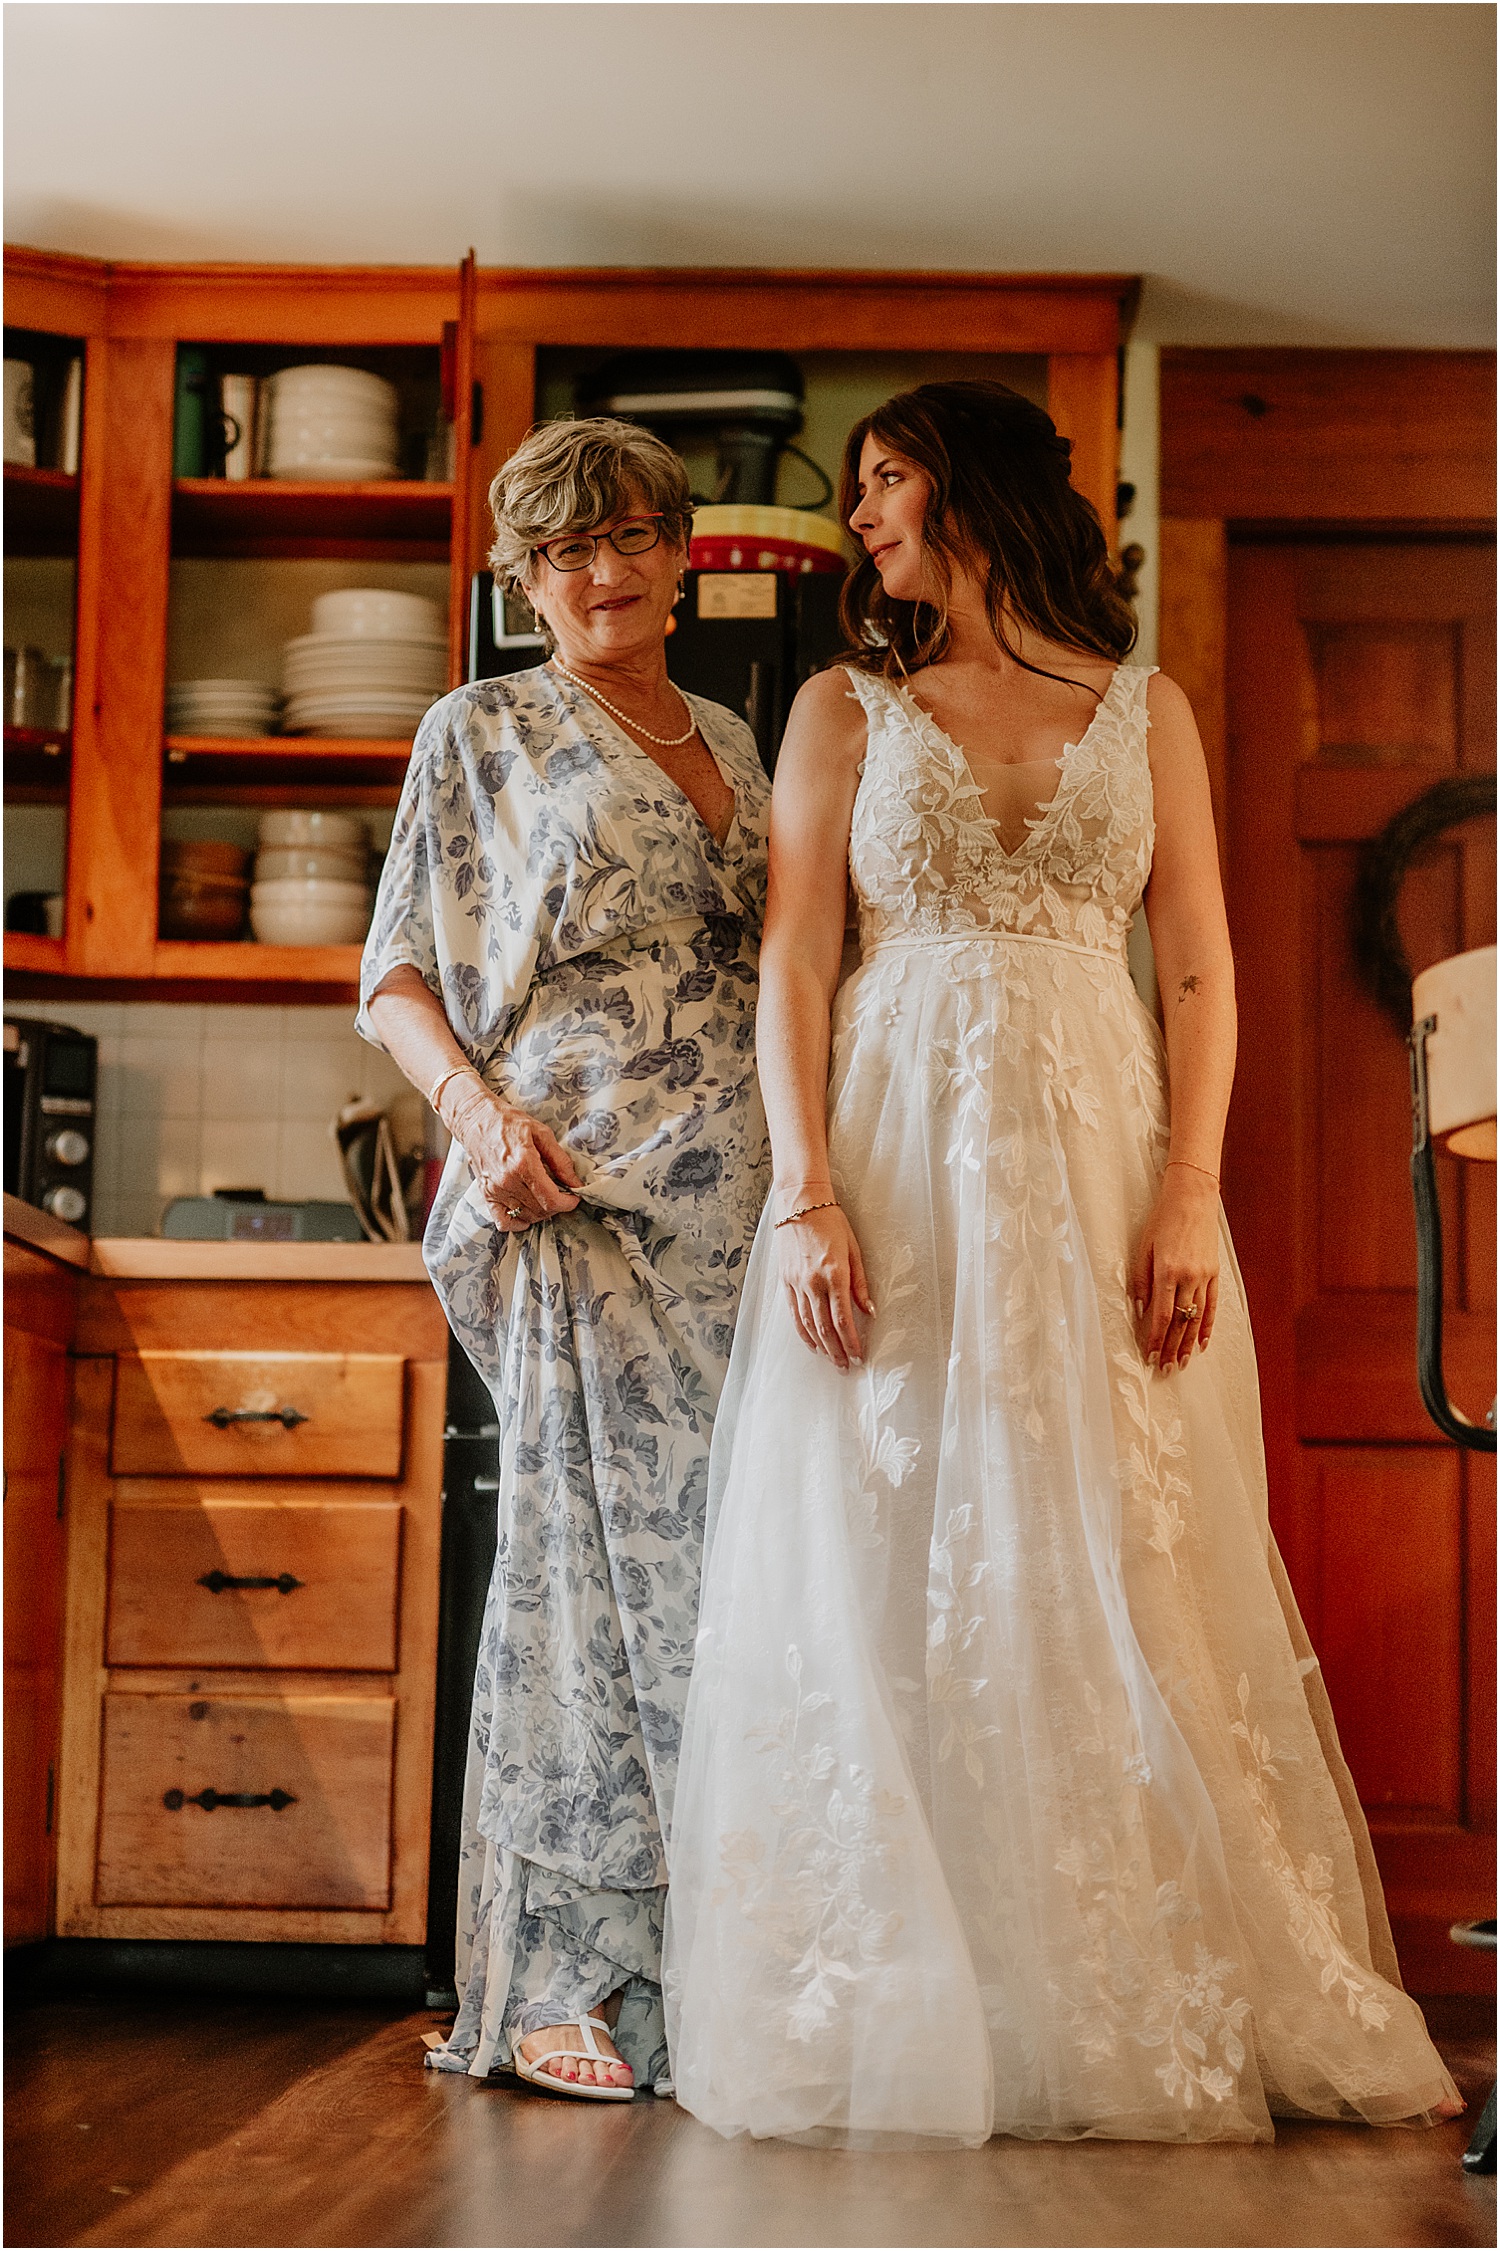 Mom and daughter share an intimate moment for Caswell Farm Wedding Photographer